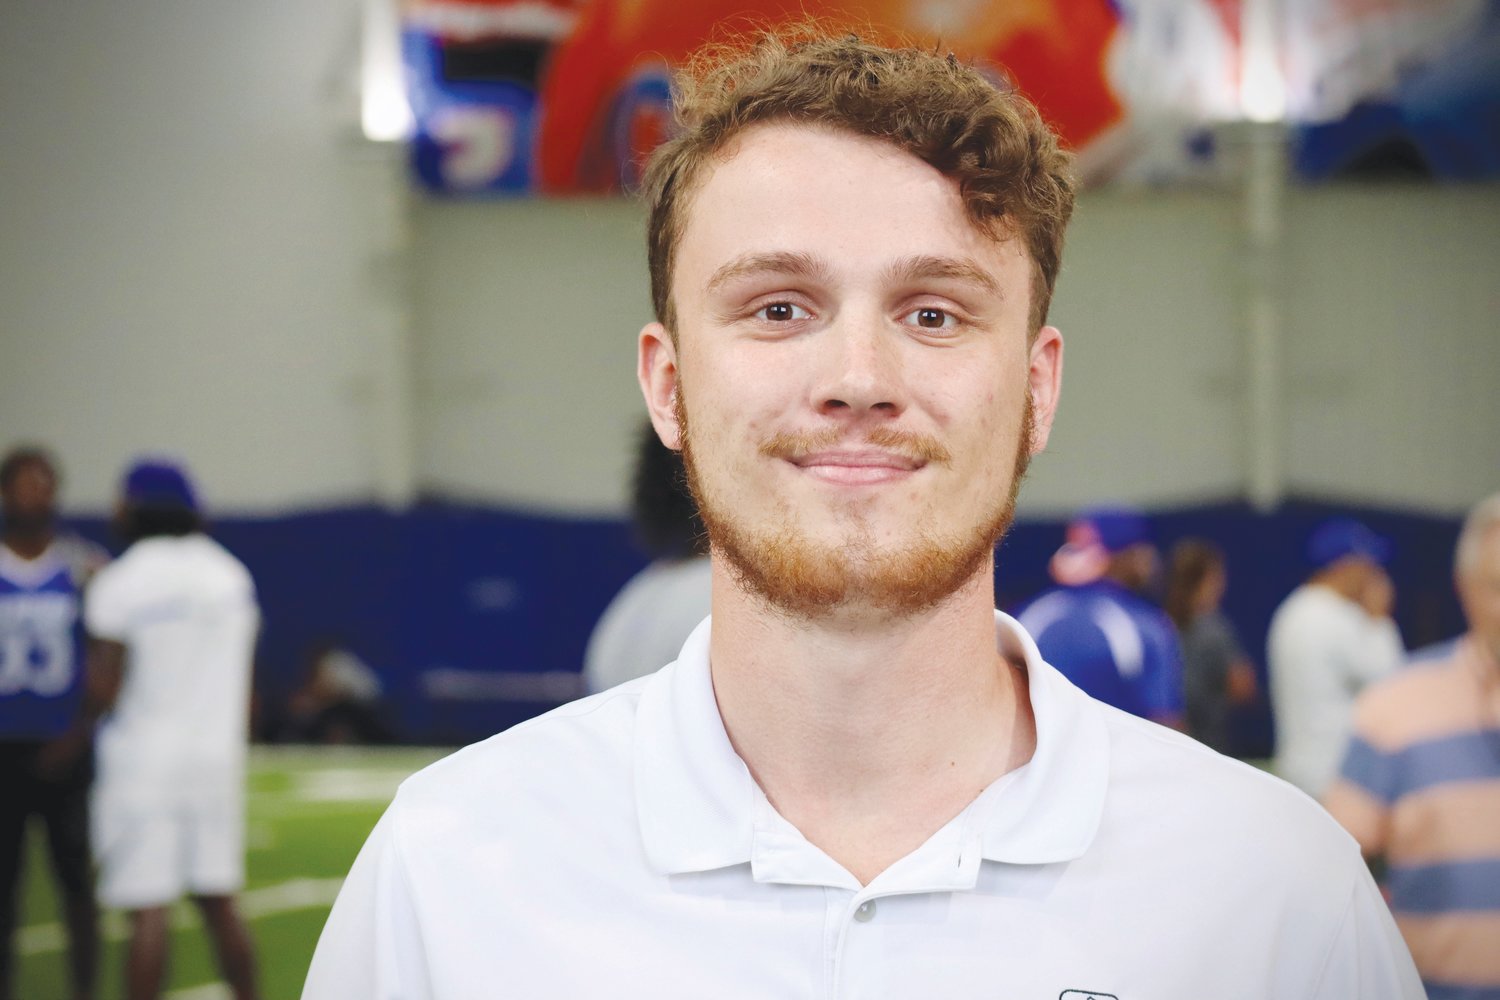 Zach Goodall takes photos and writes stories covering the Florida Gators’ and Tampa Bay Buccaneers’ football teams for Sports Illustrated.